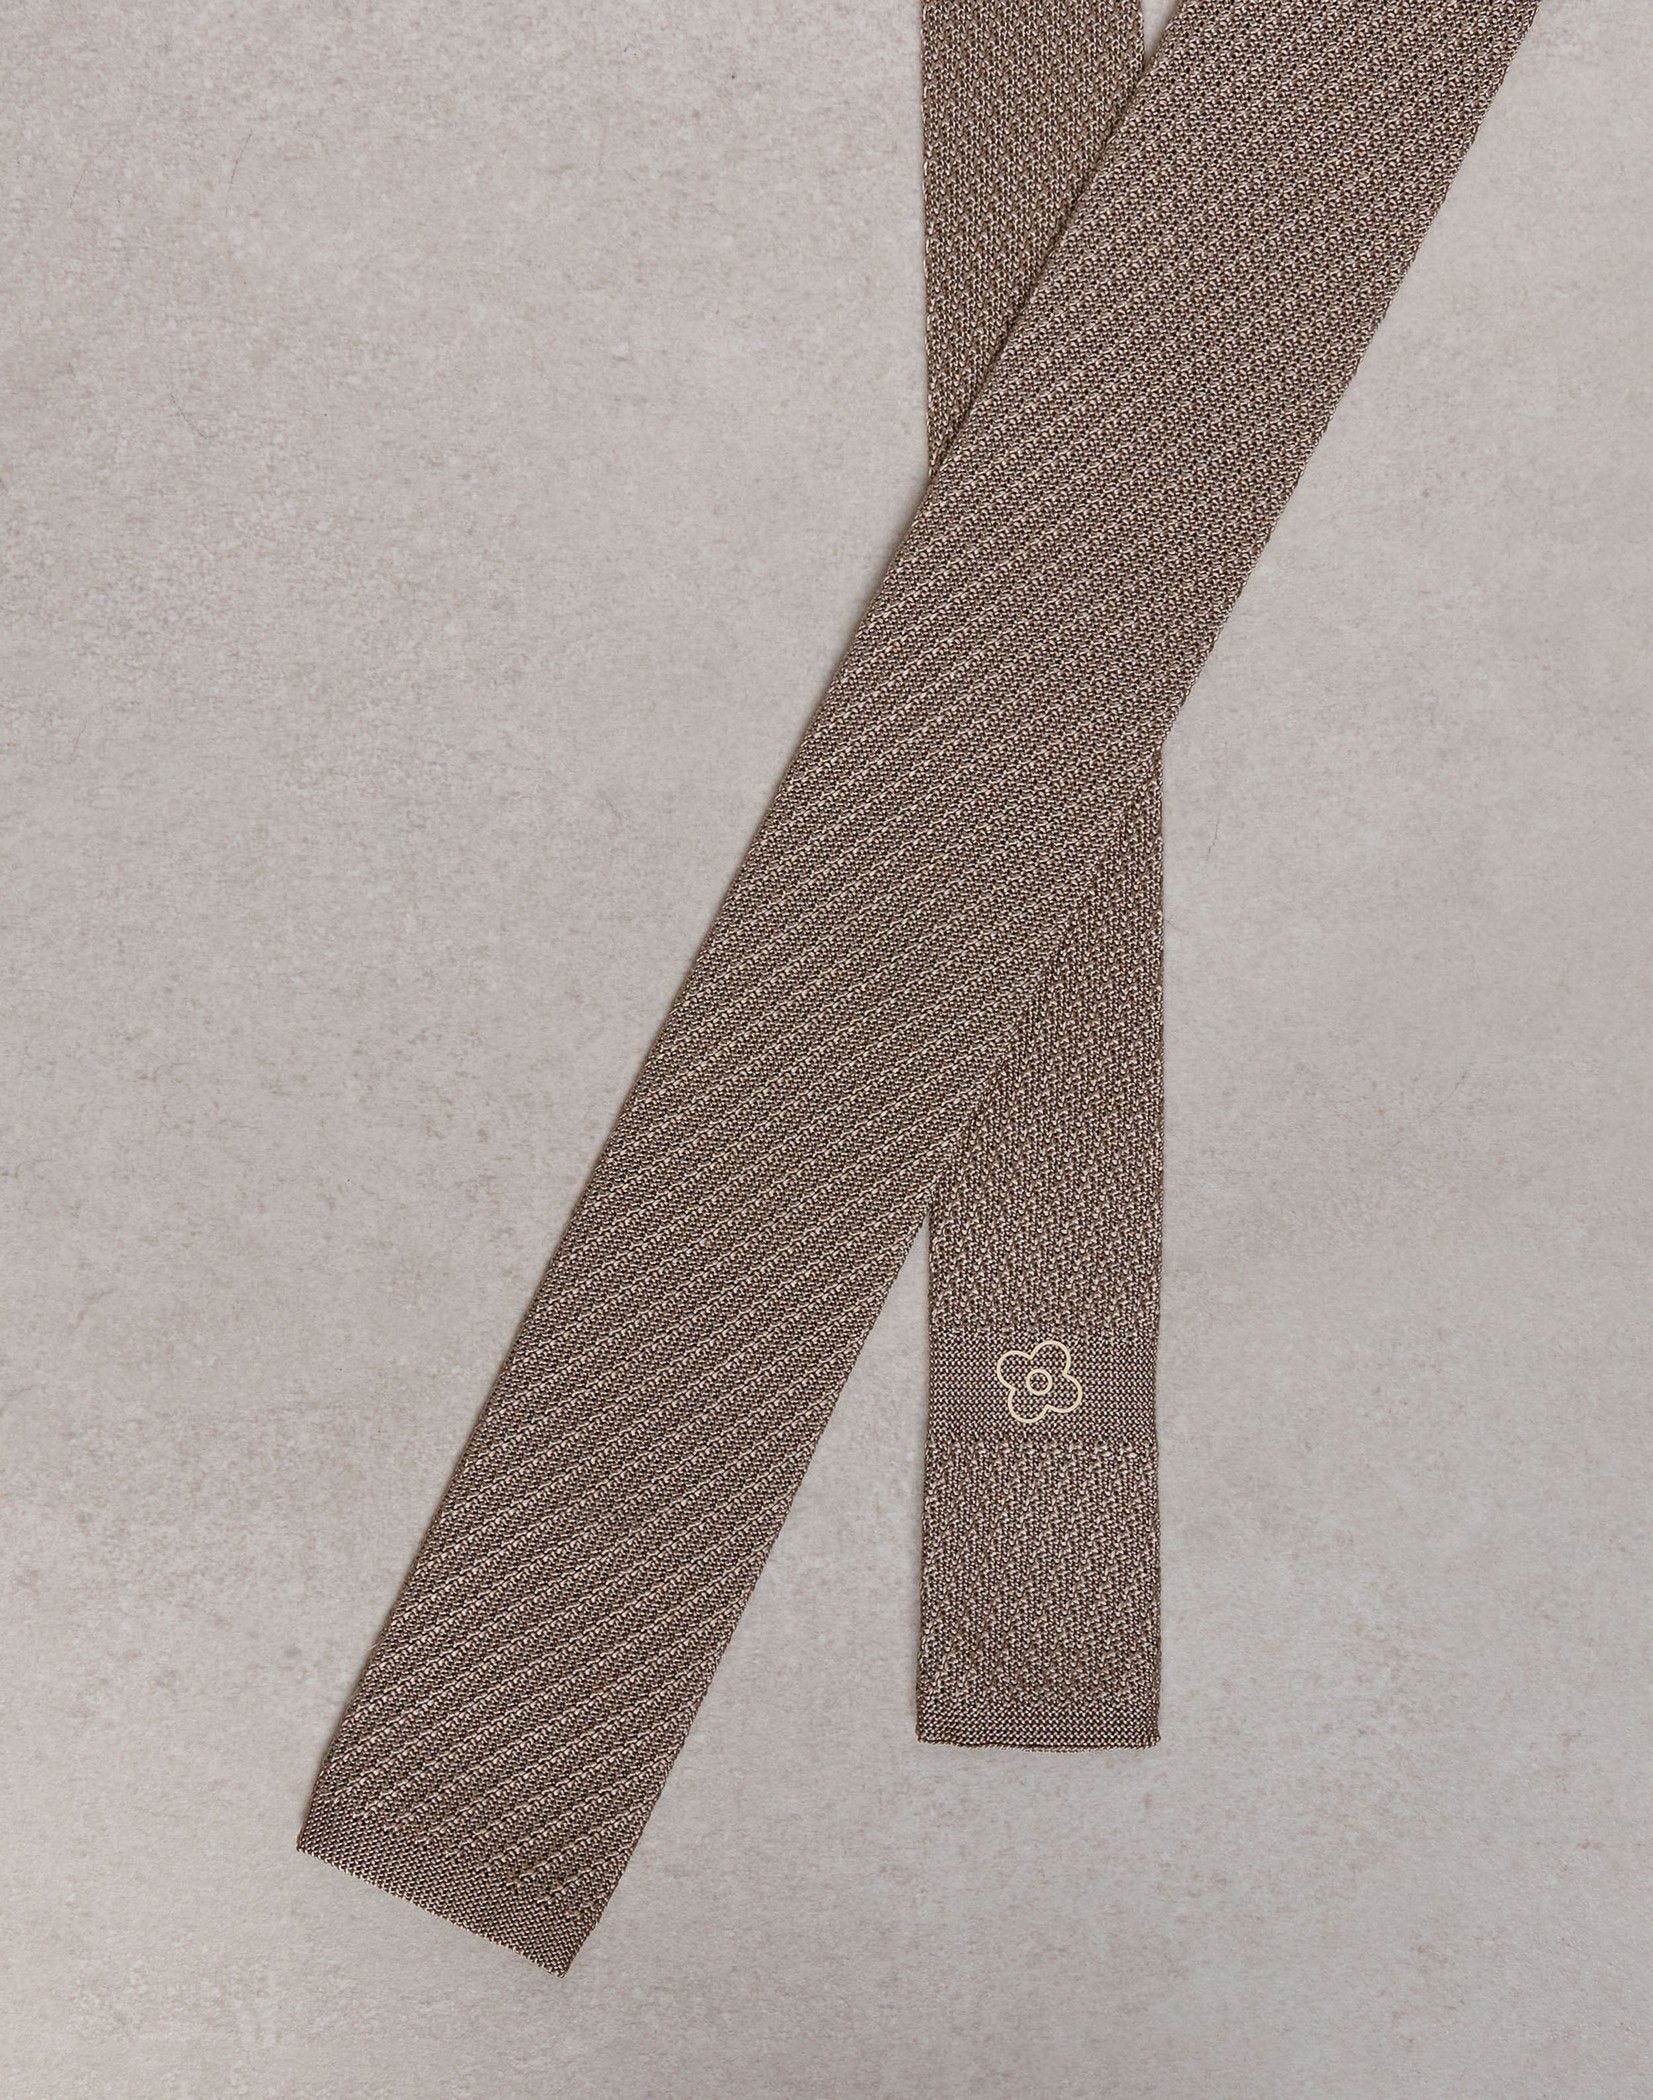 Tricot tie with jacquard design